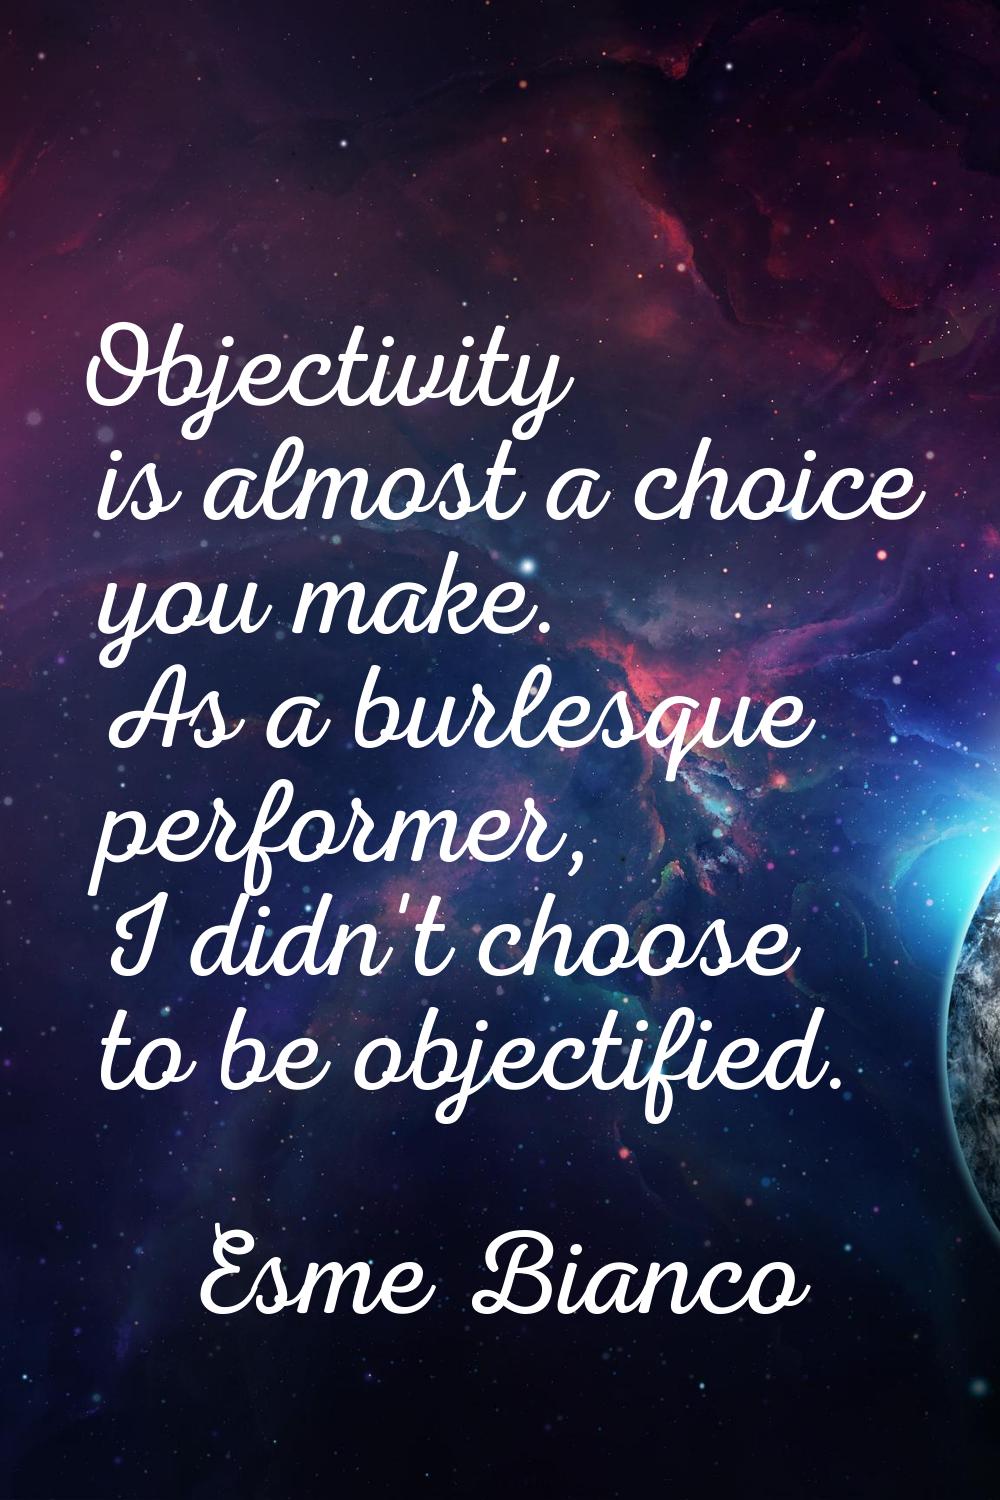 Objectivity is almost a choice you make. As a burlesque performer, I didn't choose to be objectifie